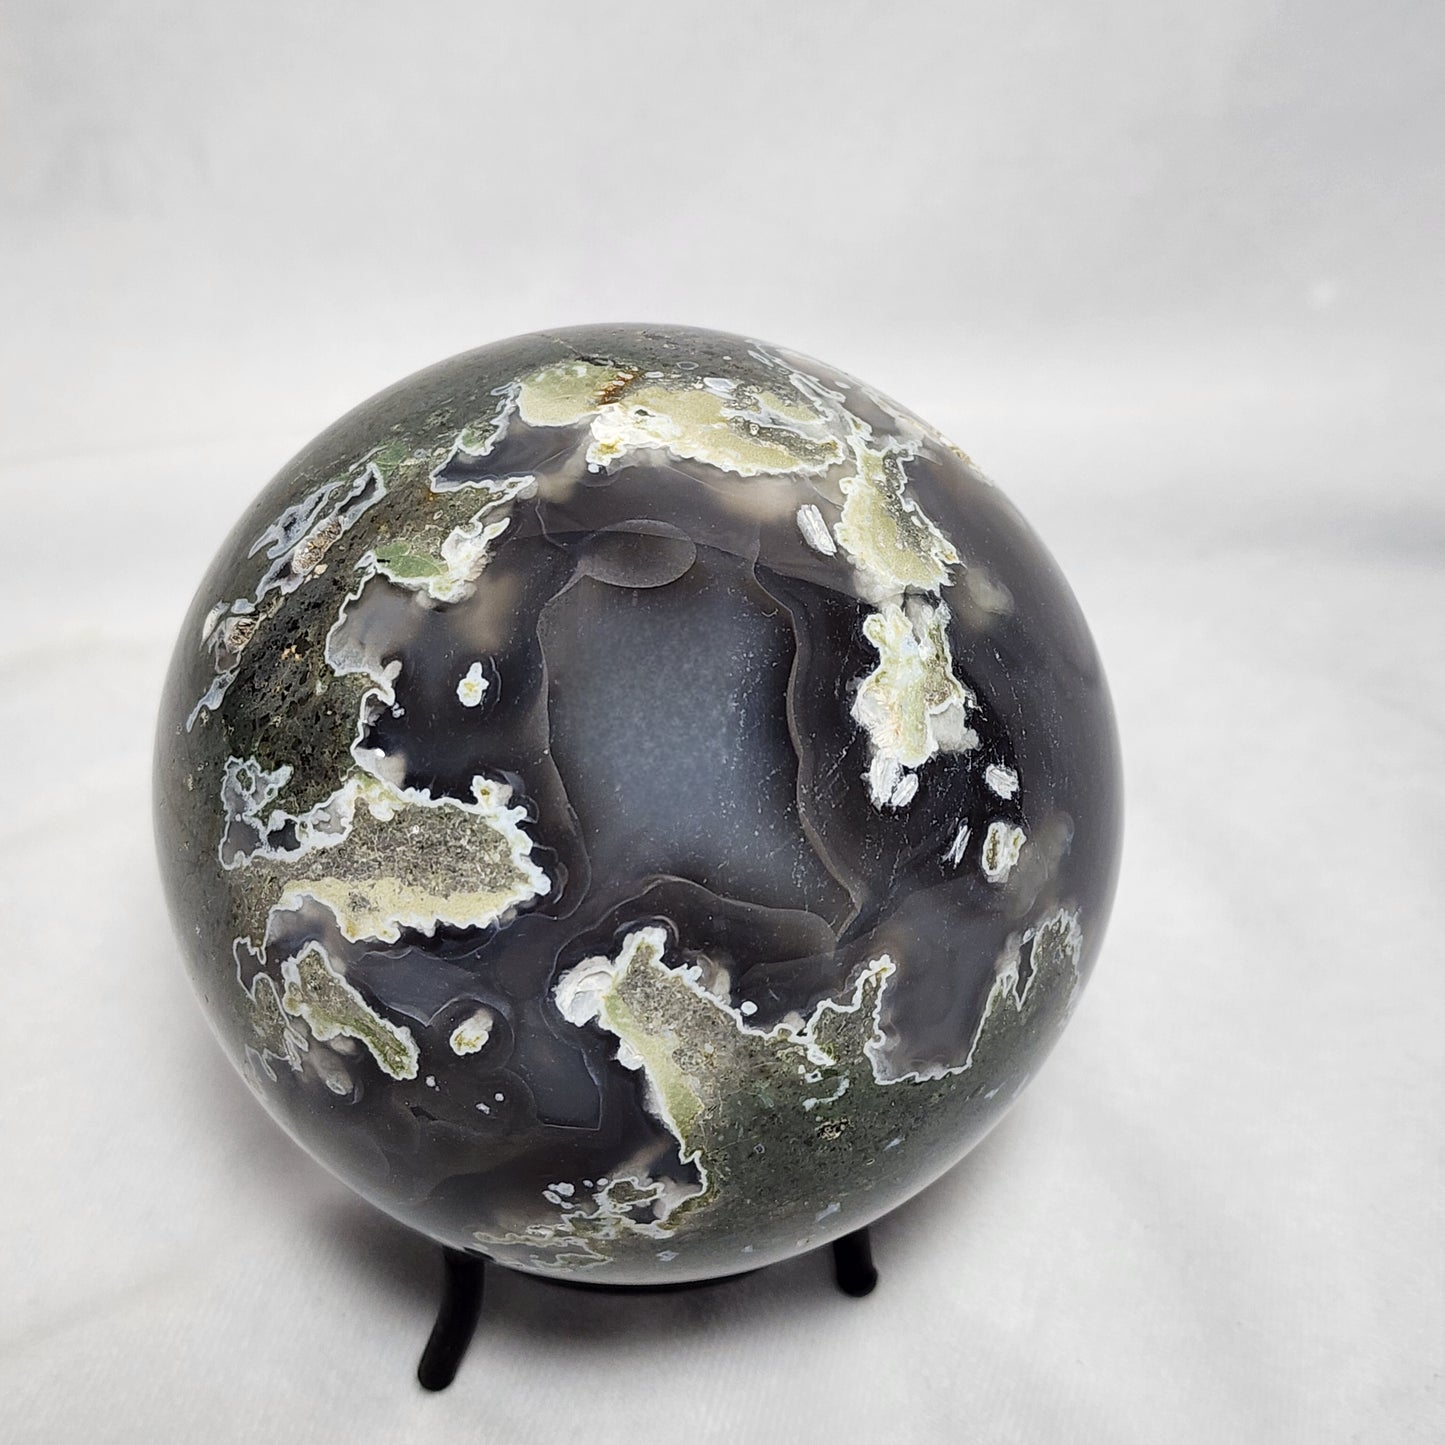 Magnificent Moss Agate Sphere 4"